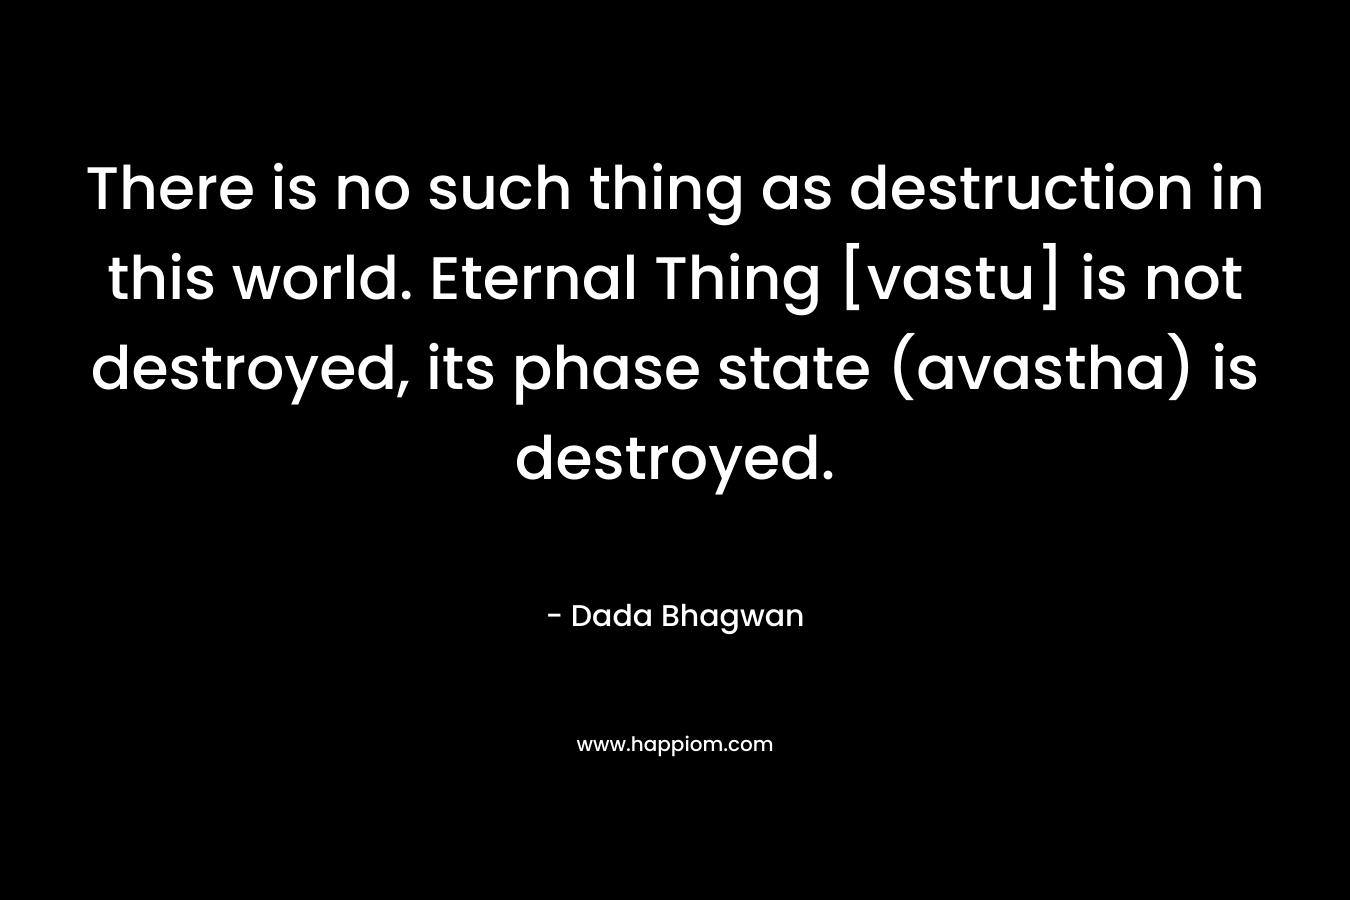 There is no such thing as destruction in this world. Eternal Thing [vastu] is not destroyed, its phase state (avastha) is destroyed.